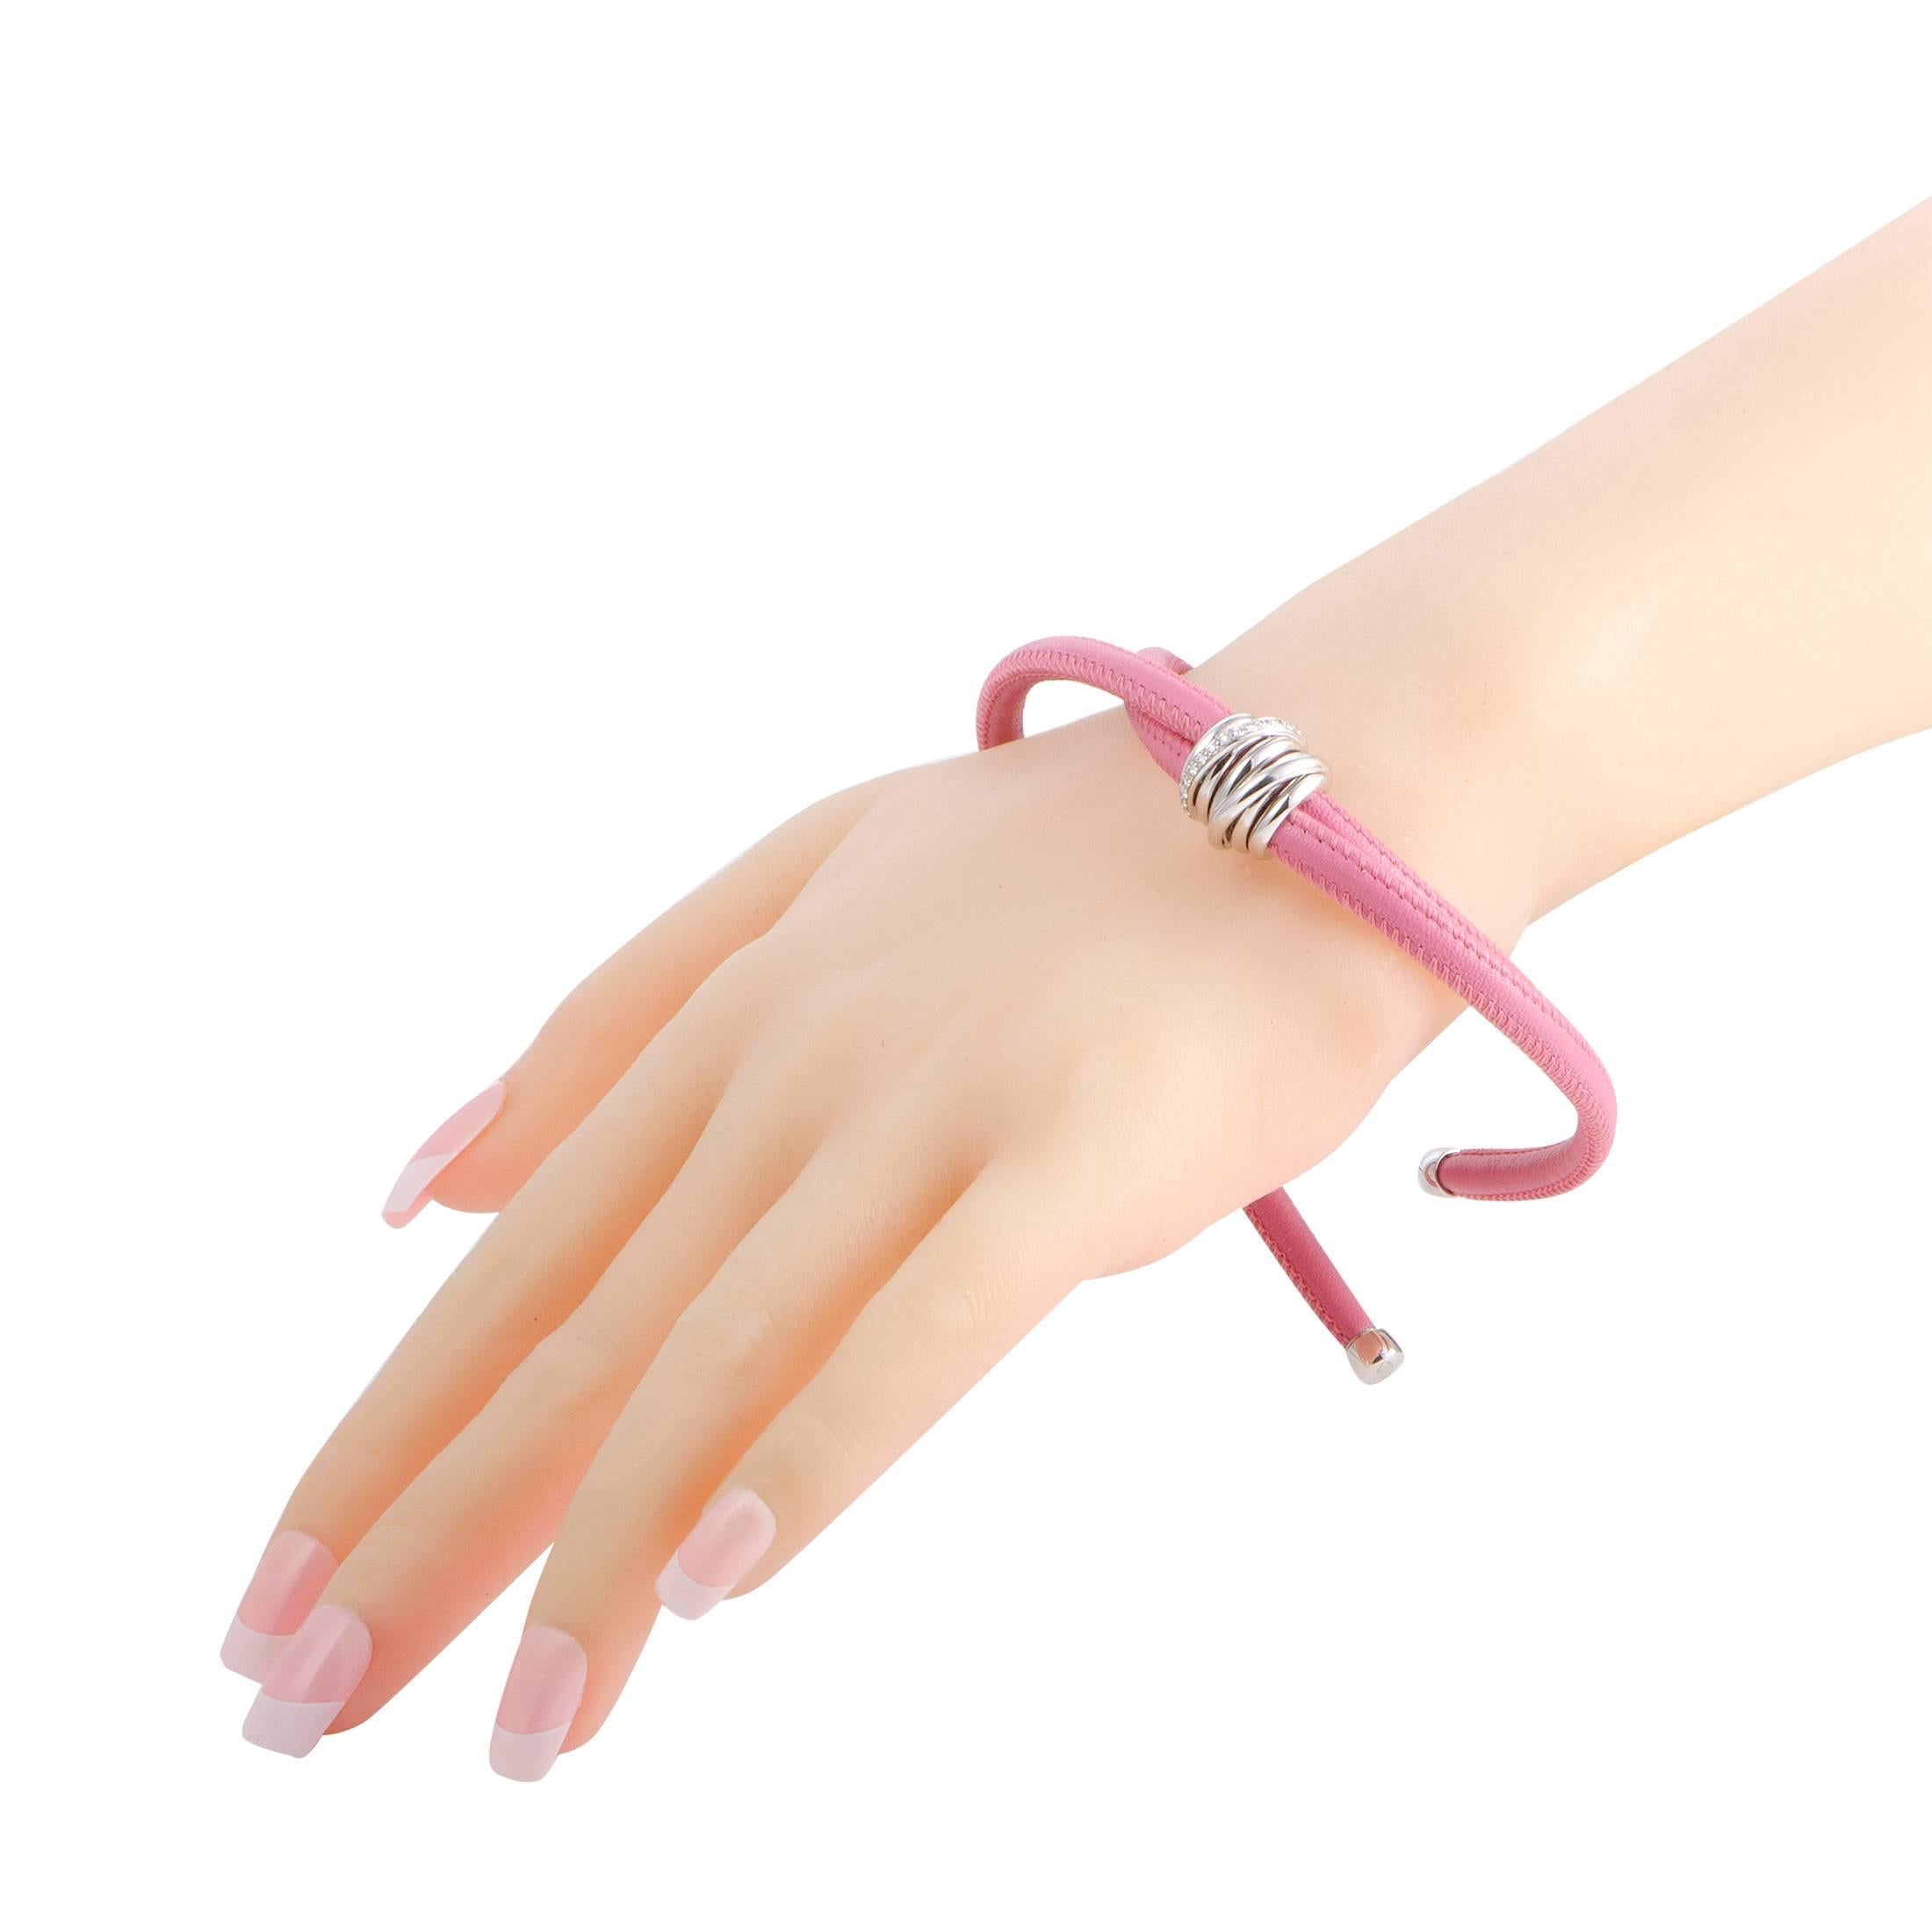 Gorgeously vivacious and feminine, this lovely bracelet is presented in eye-catching pink leather and gleaming 18K white gold and given a nifty touch of luxurious brilliance by the scintillating diamond stones. The bracelet is created by de